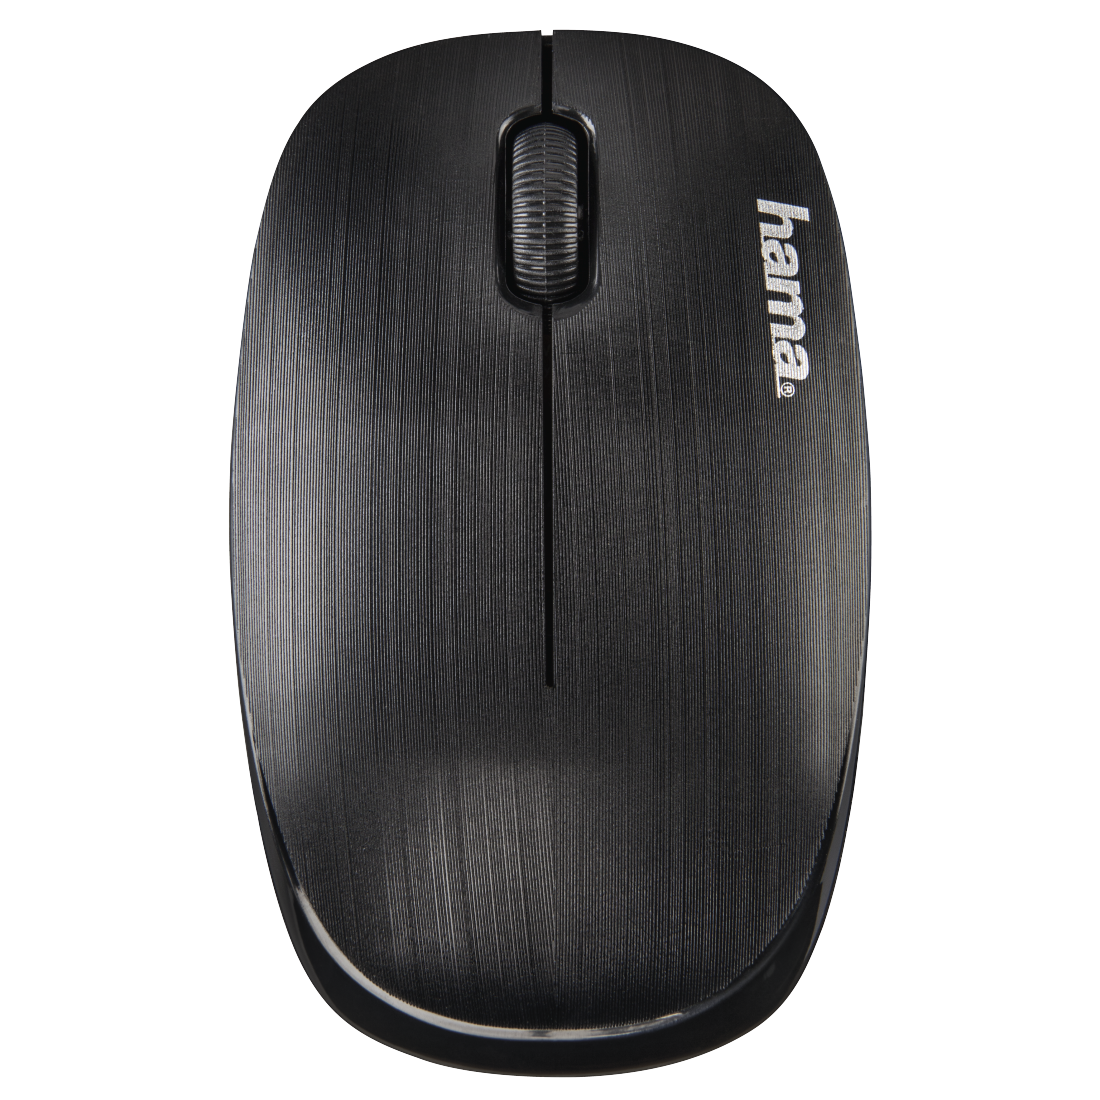 Hama MW-110 Optical Wireless Mouse - Black | 371508 from Hama - DID Electrical